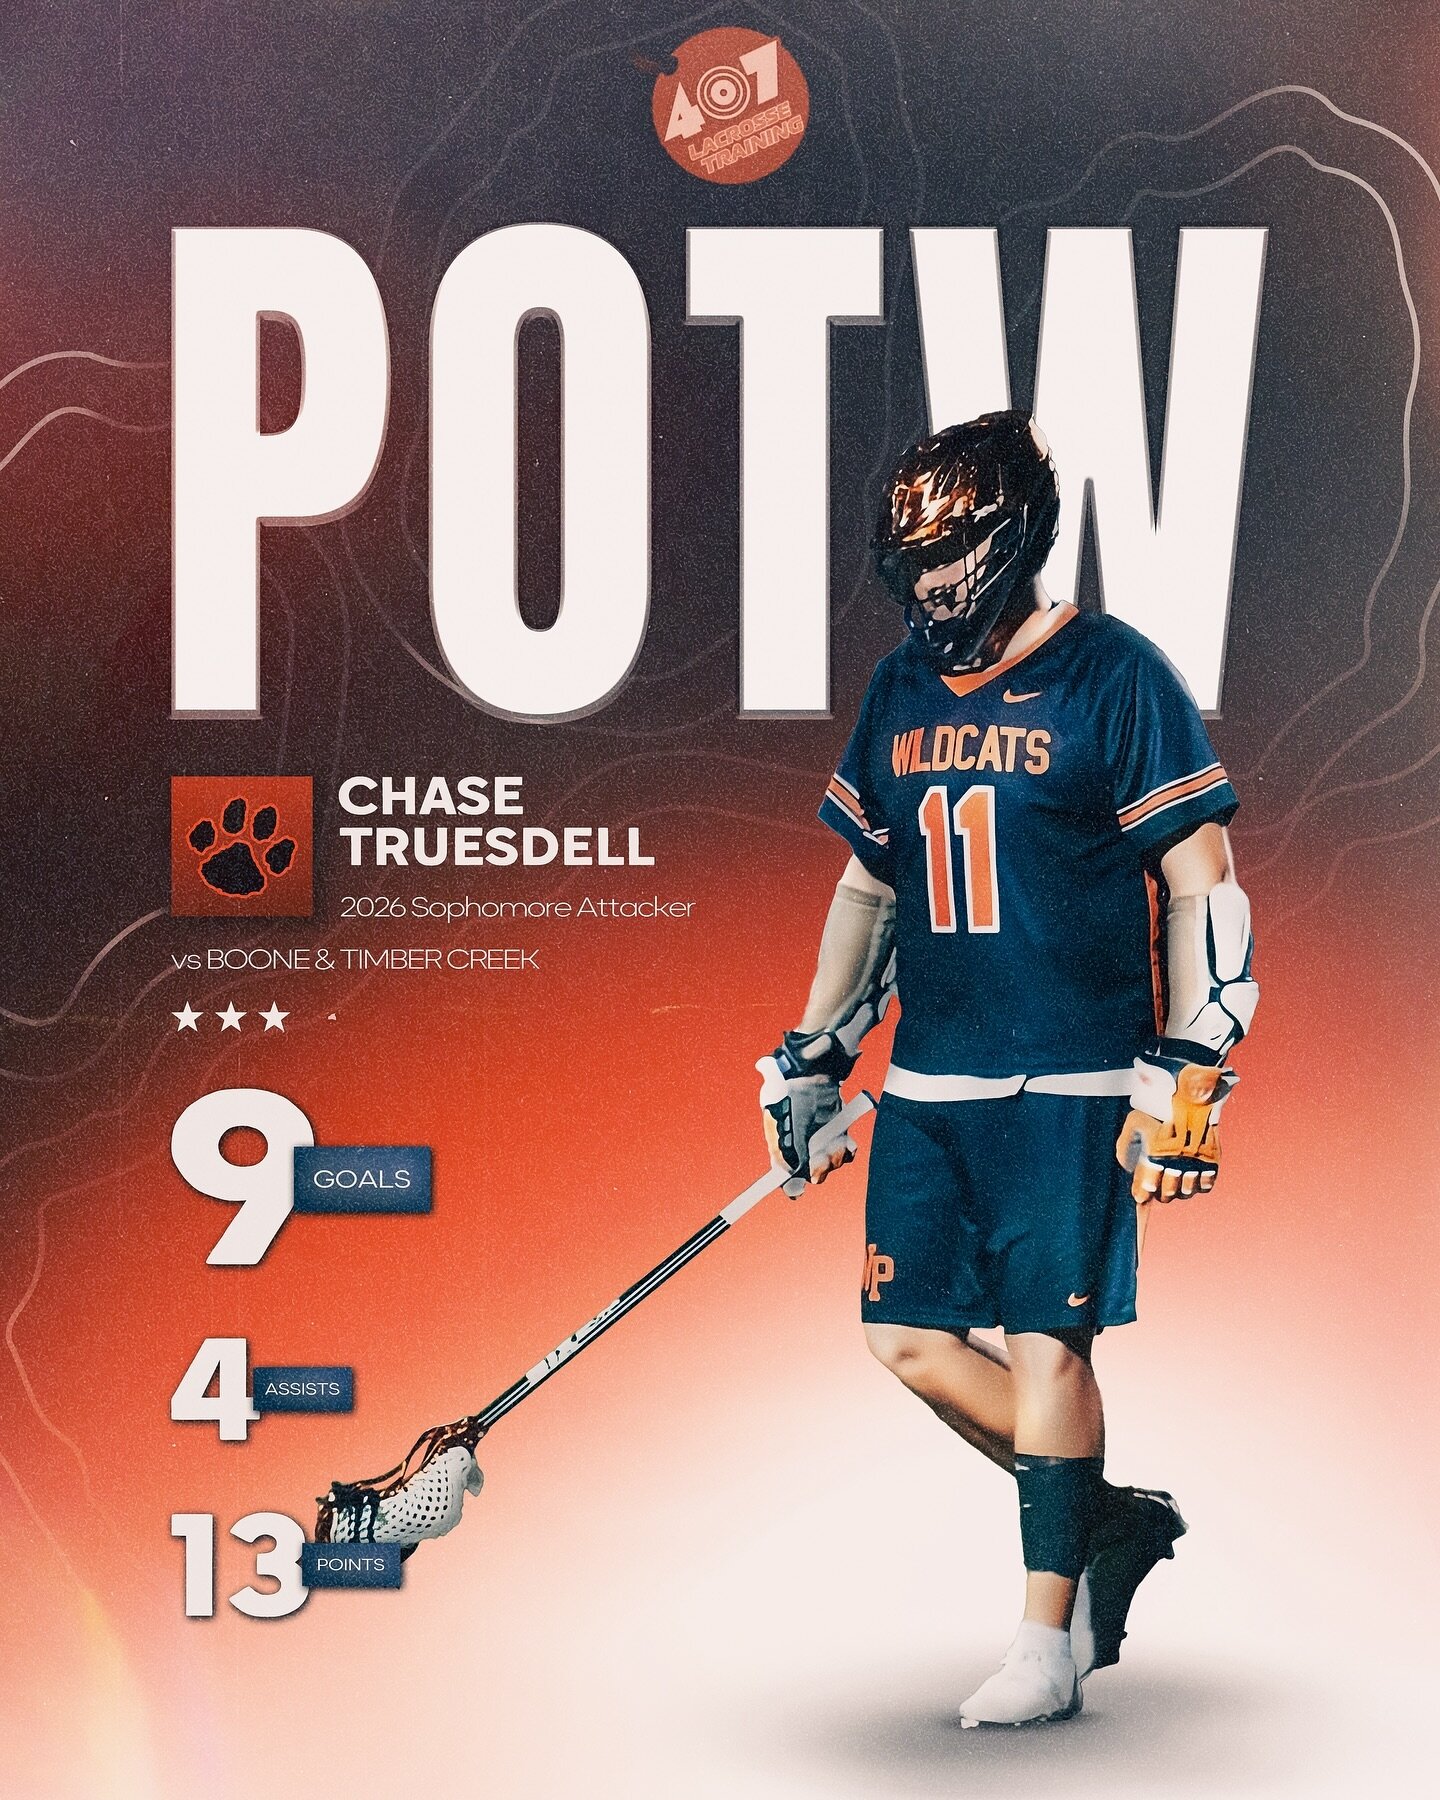 Congratulations to @wp_boys_lacrosse Attackmen @chase.truesdell on being voted this weeks&rsquo; HS POTW. Chase had 9 goals and 4 assists in 2 games against Timber Creek and Boone🍊 #407Lacrosse #OrlandoLacrosse #POTW